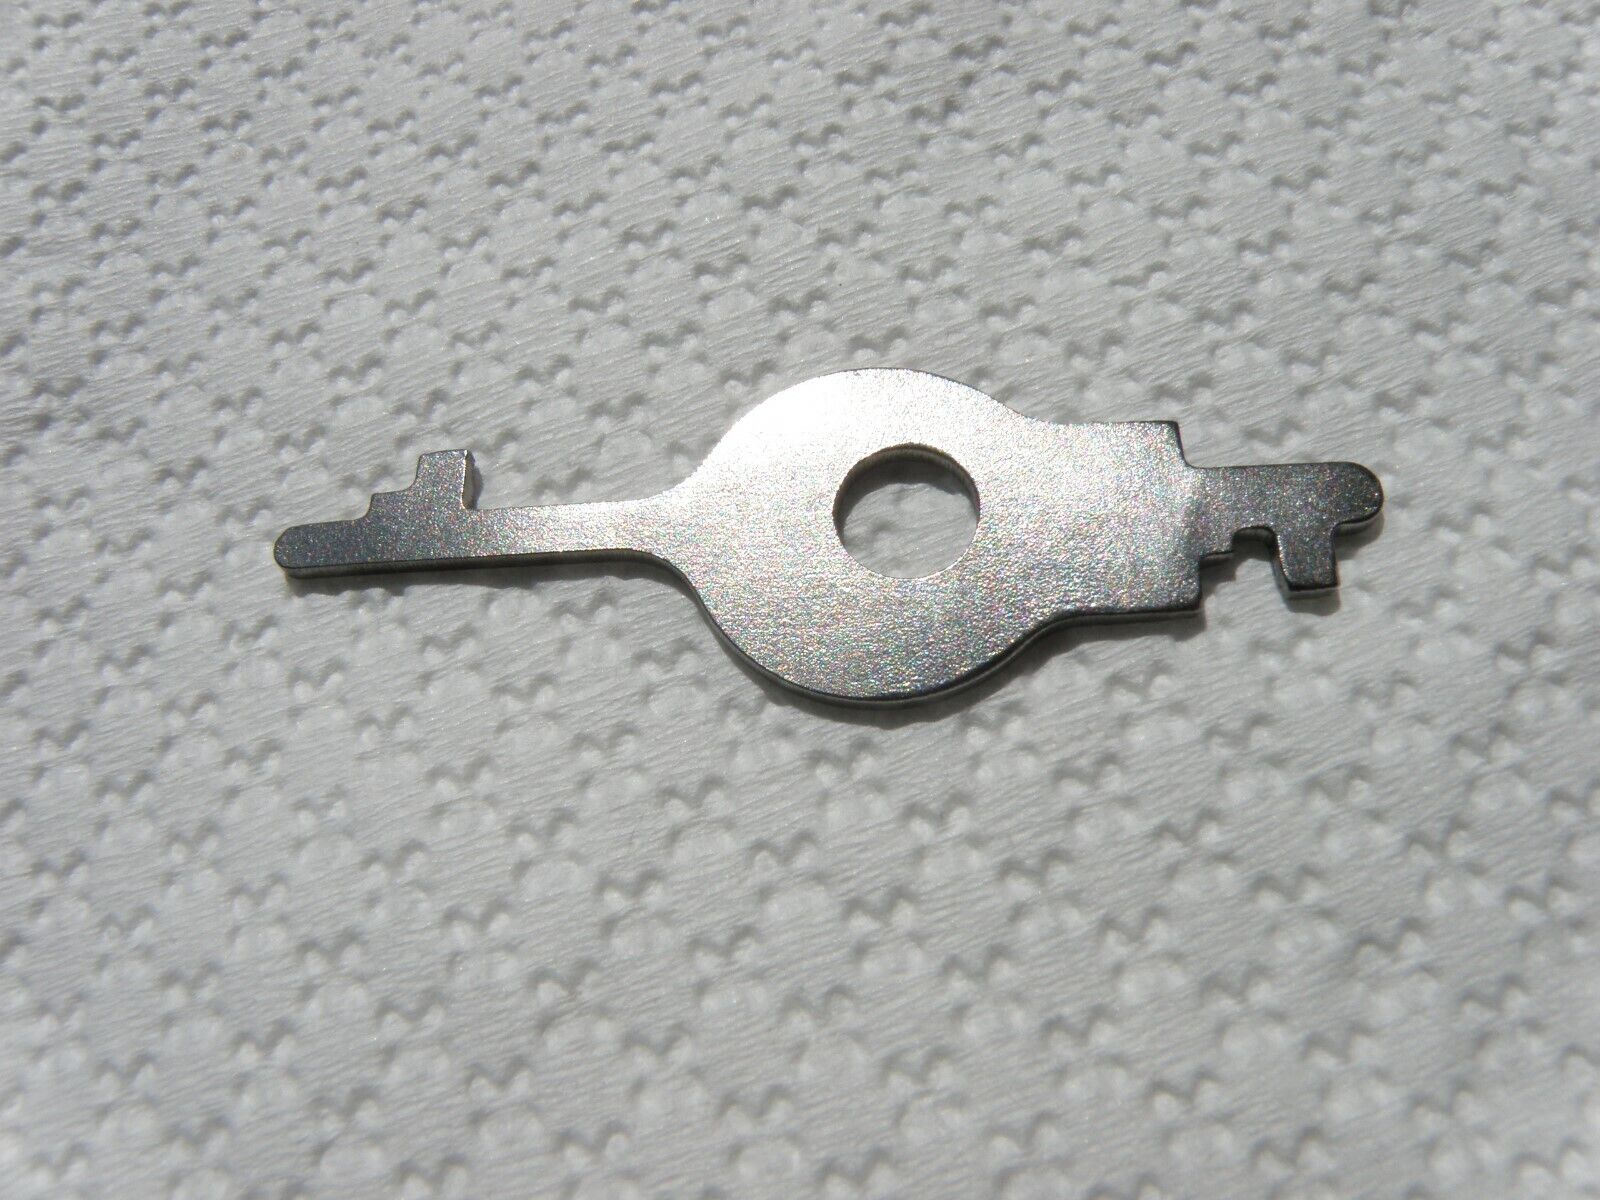  ADD-A-COIN BANK KEY, COPY OF ORIGINAL         AND INCLUDES  DIRECTIONS